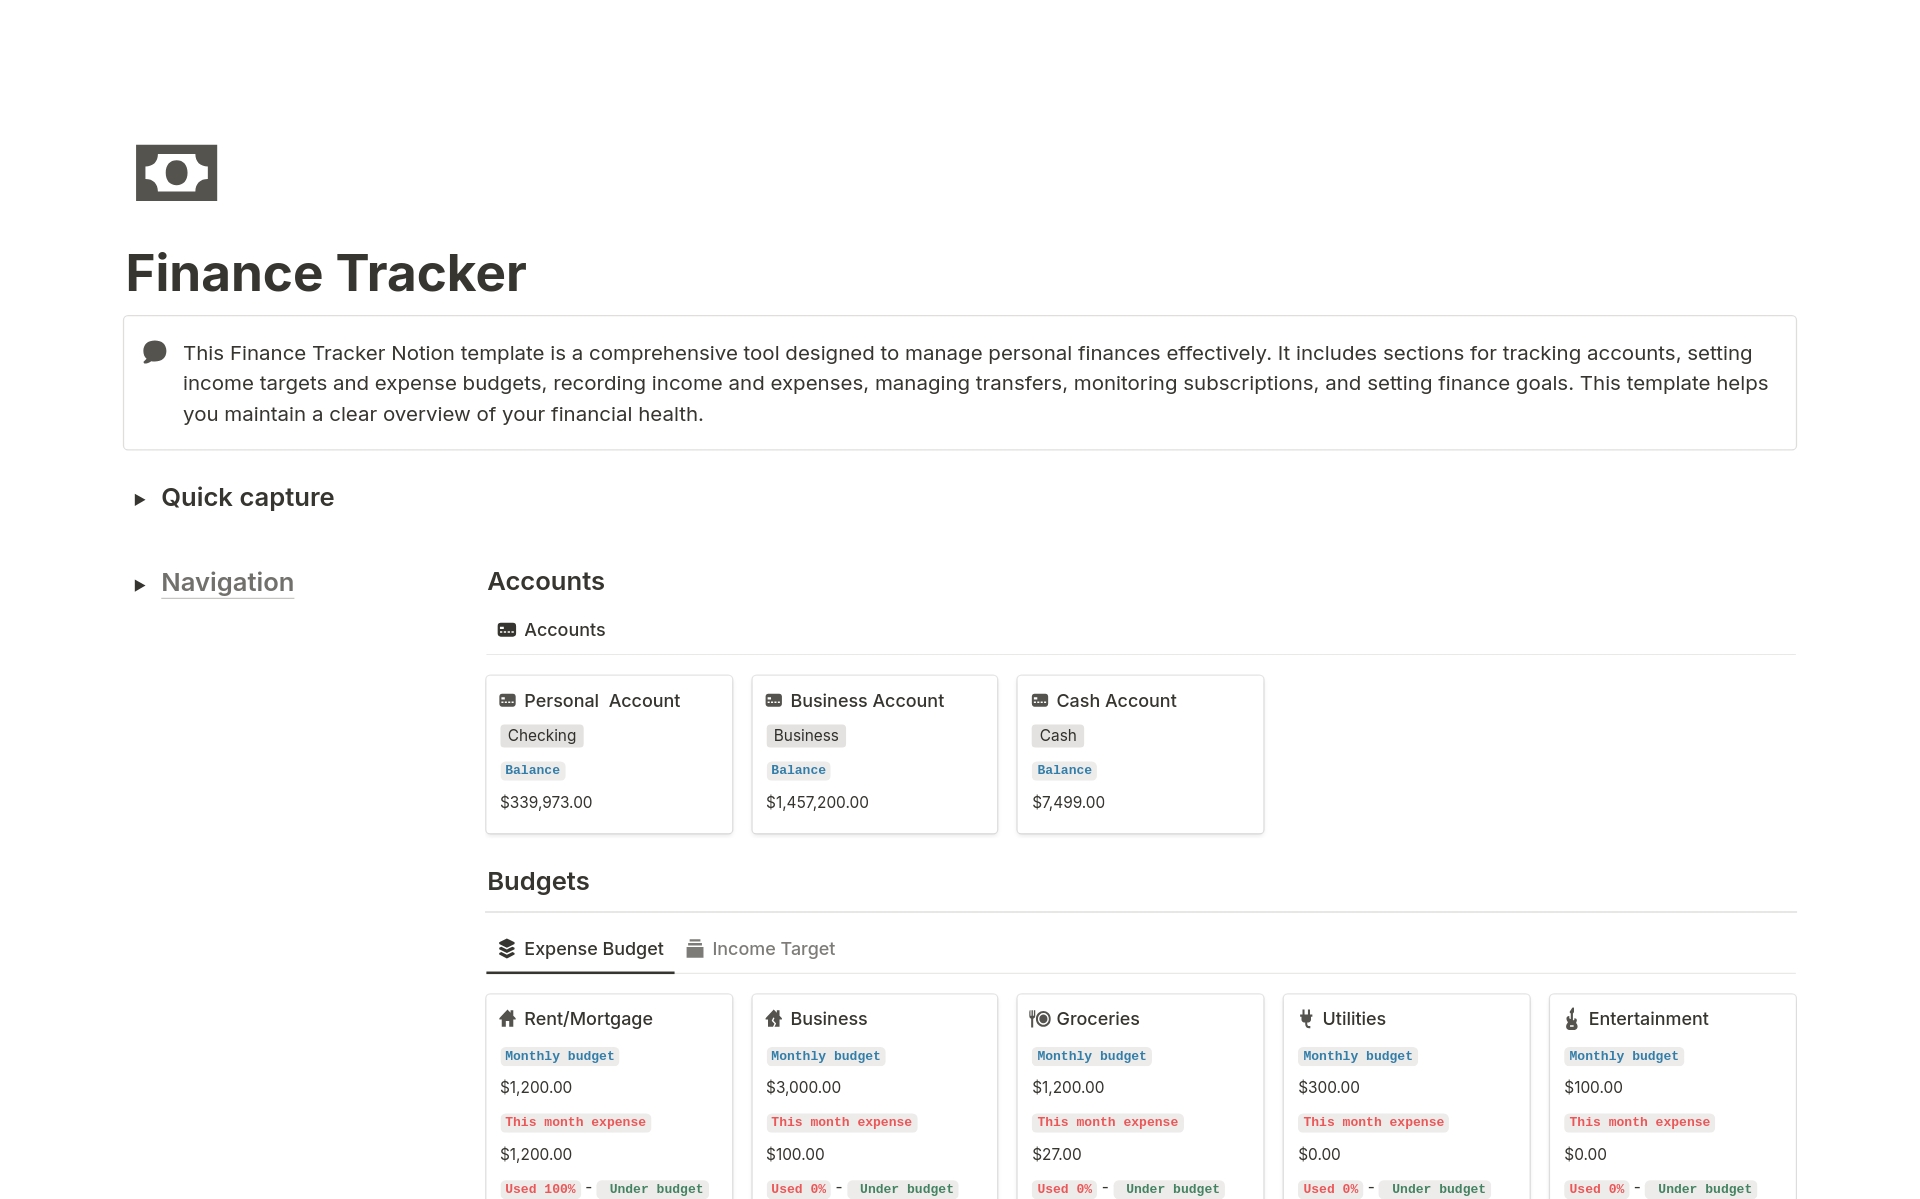 This Finance Tracker Notion template is a comprehensive tool designed to manage personal finances effectively.